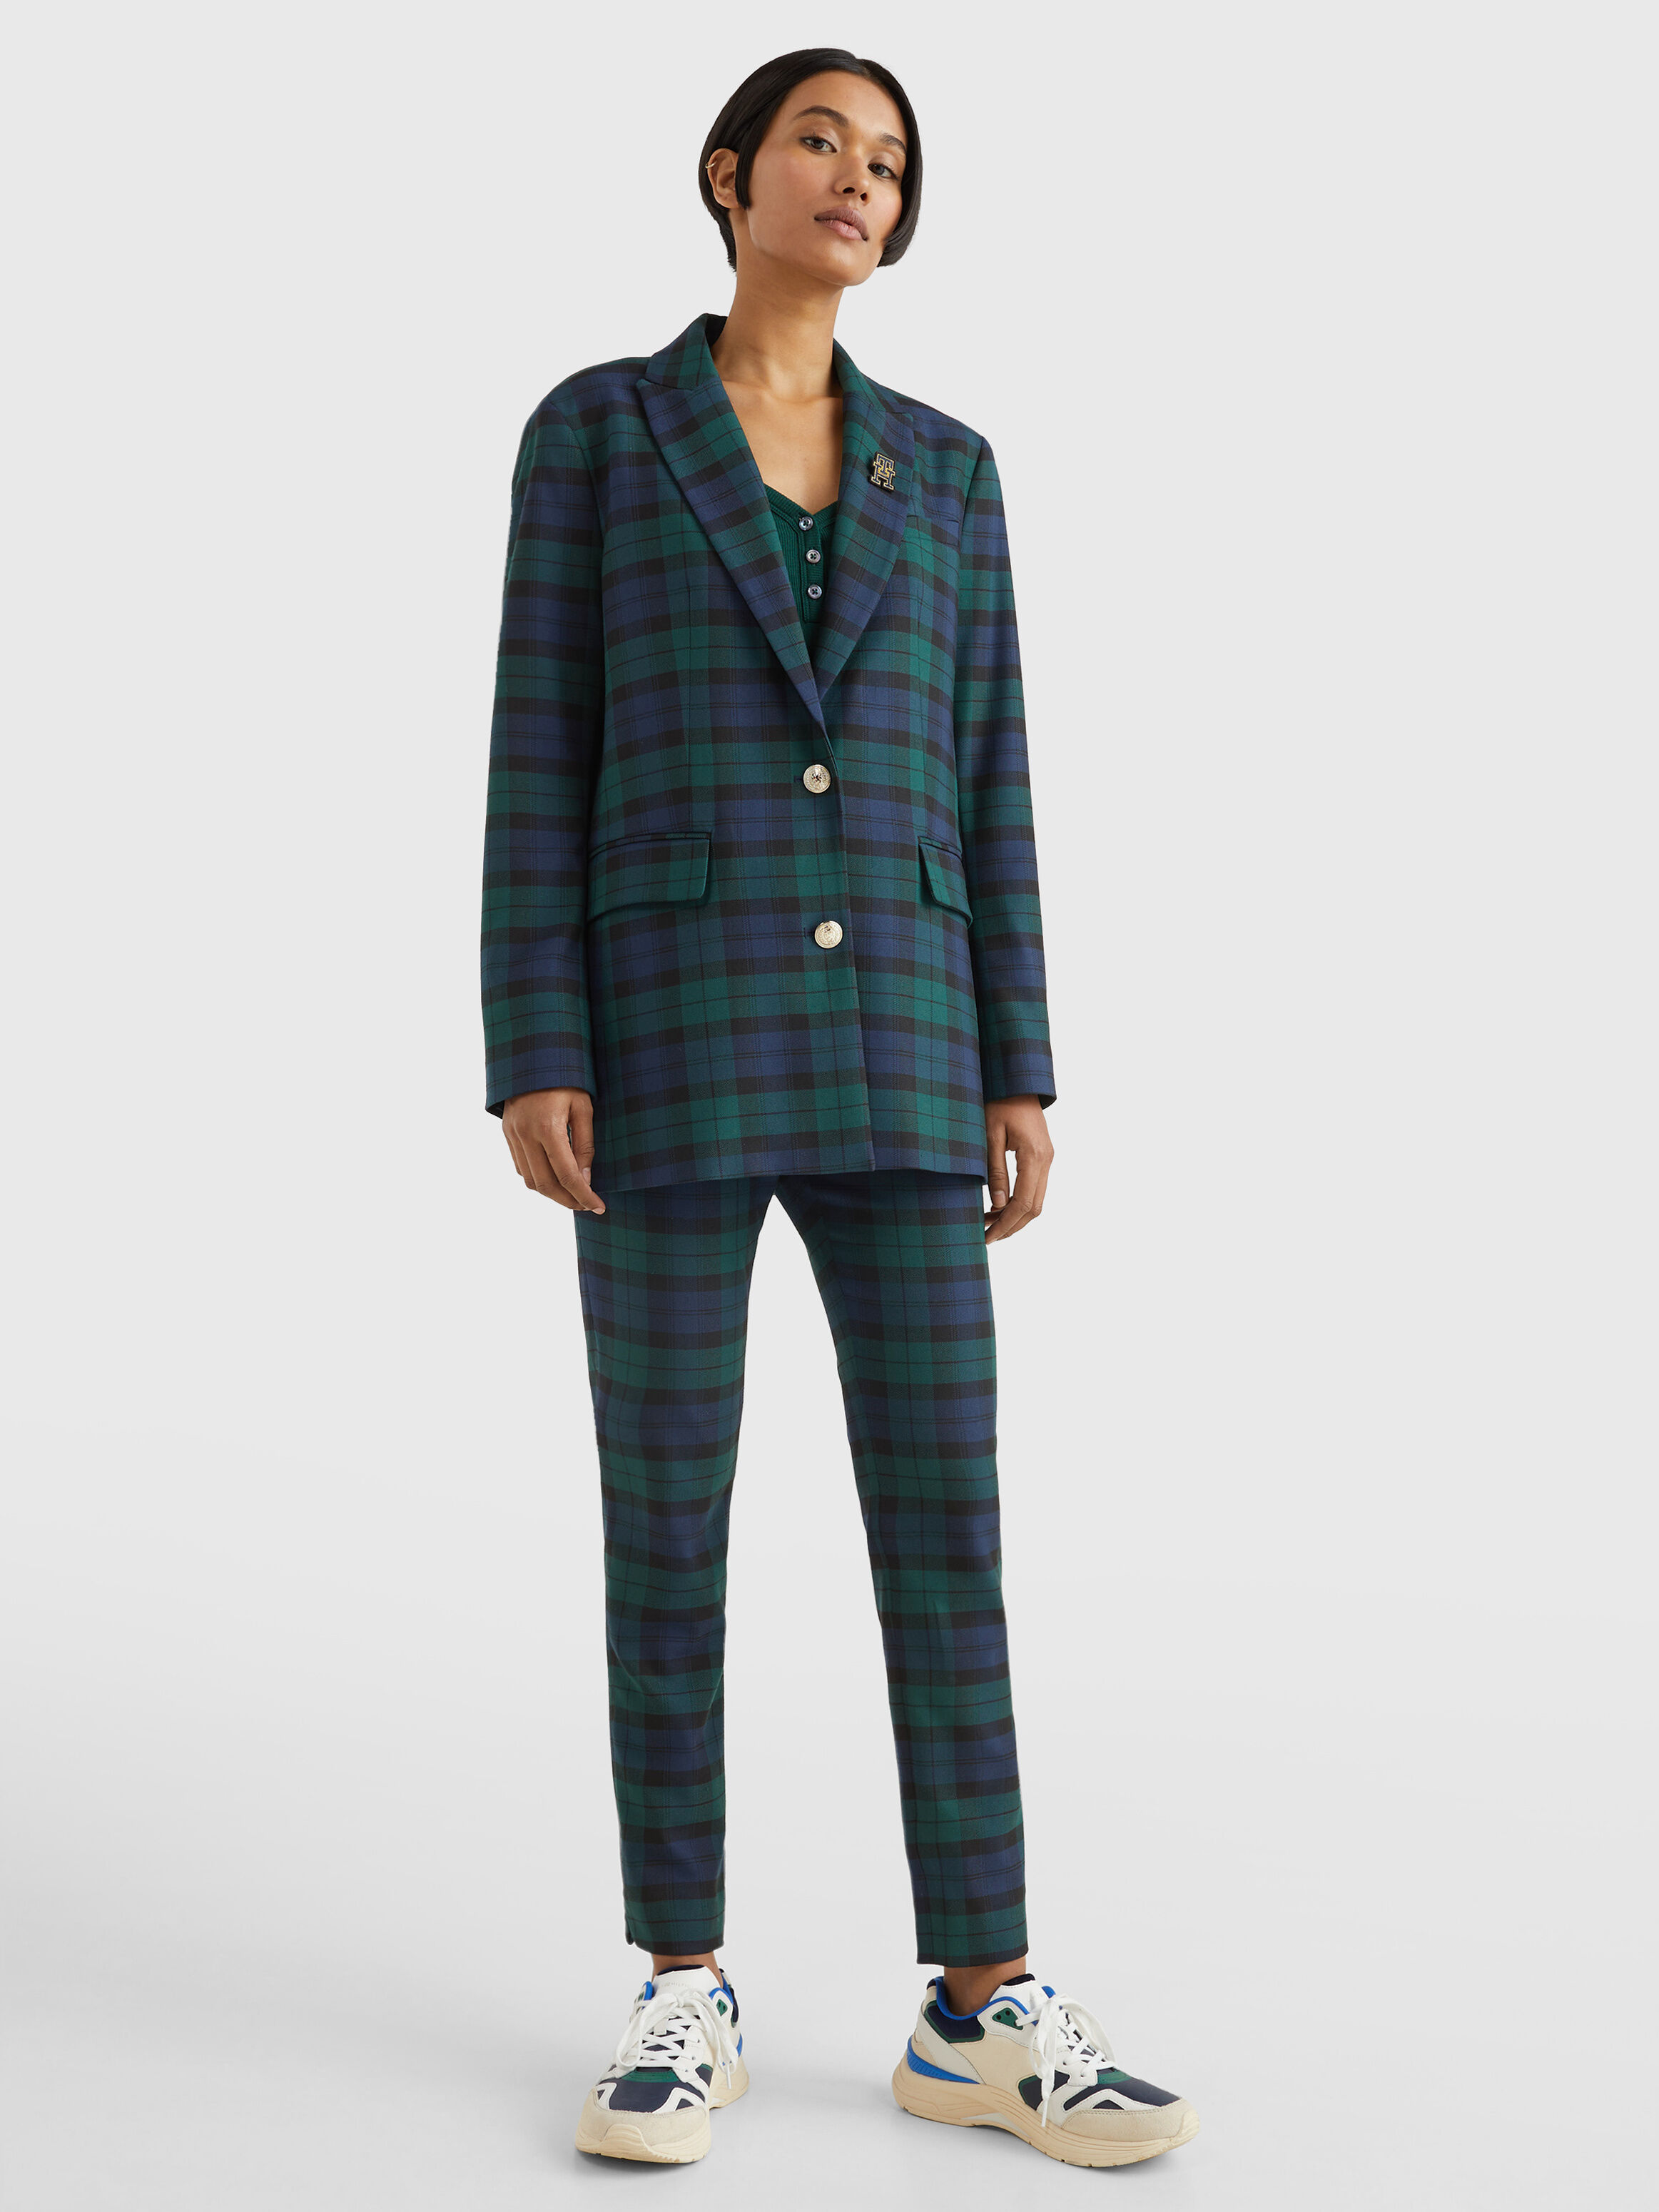 Buy Polo Ralph Lauren Women Green Plaid Wool Twill WideLeg Pant Online   861815  The Collective